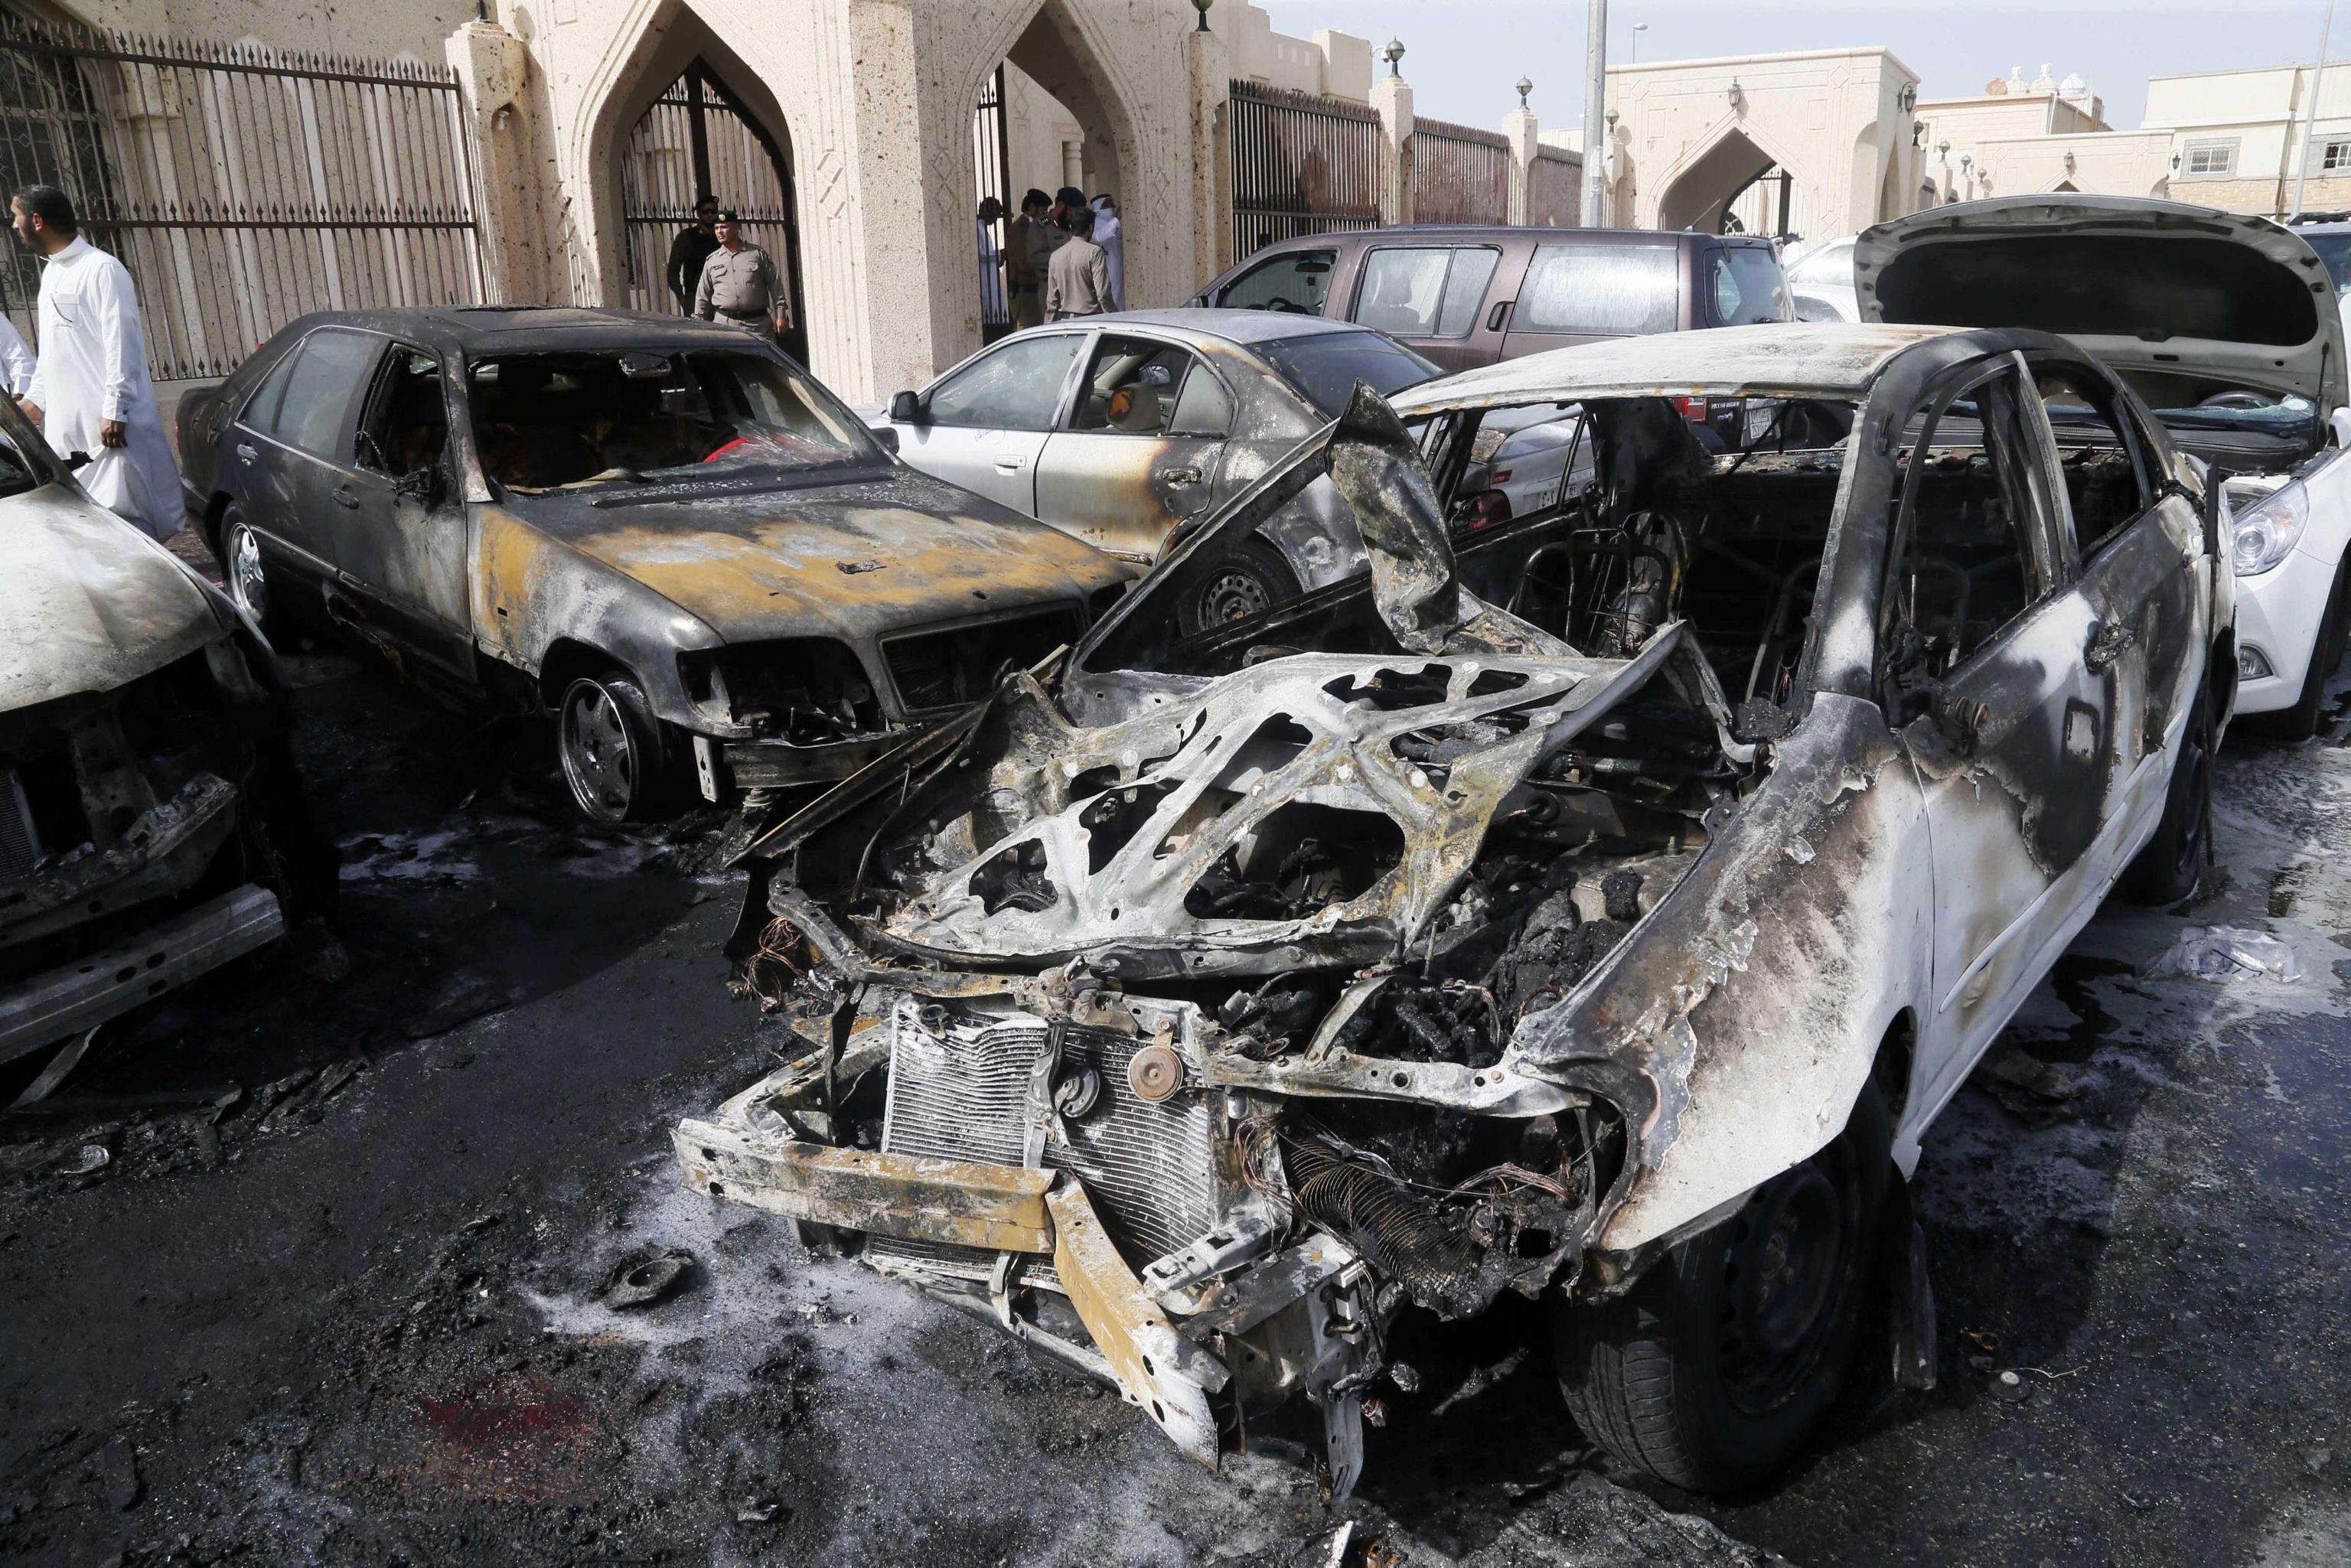 New suicide attack on a Shia mosque in Qatif